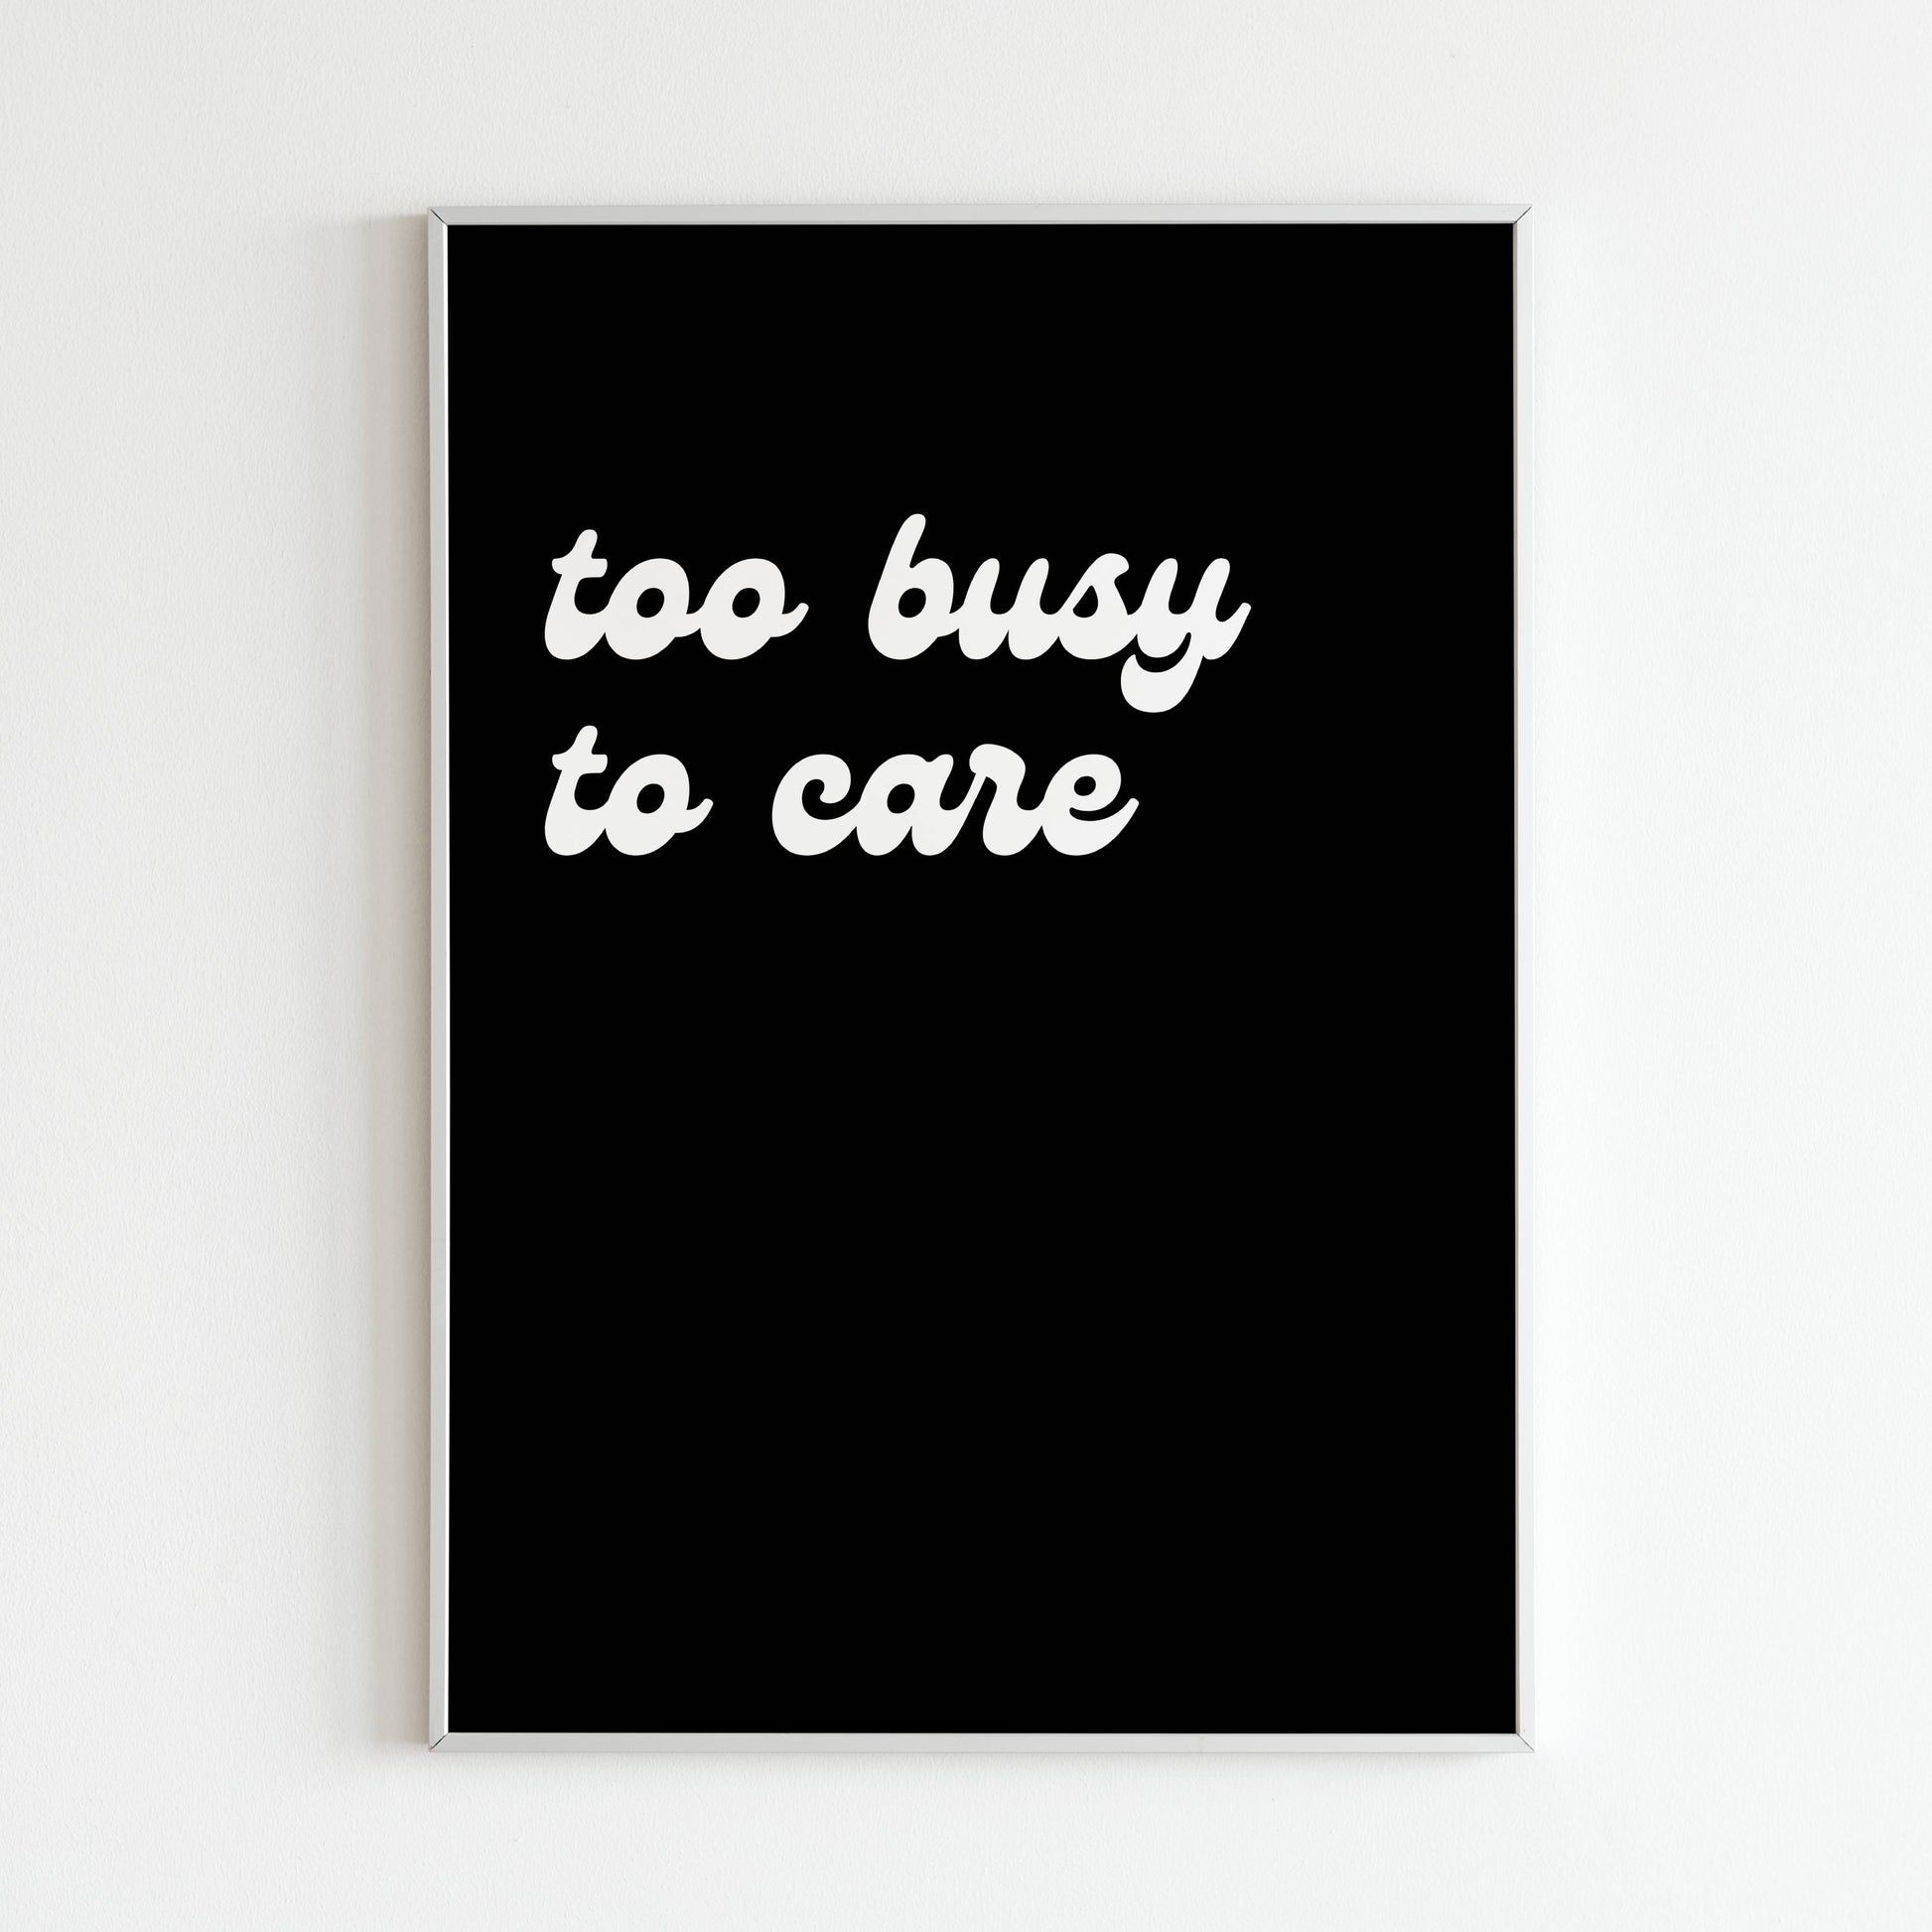 Downloadable "Too busy to care" art print, express your focus and prioritization with a touch of confidence.